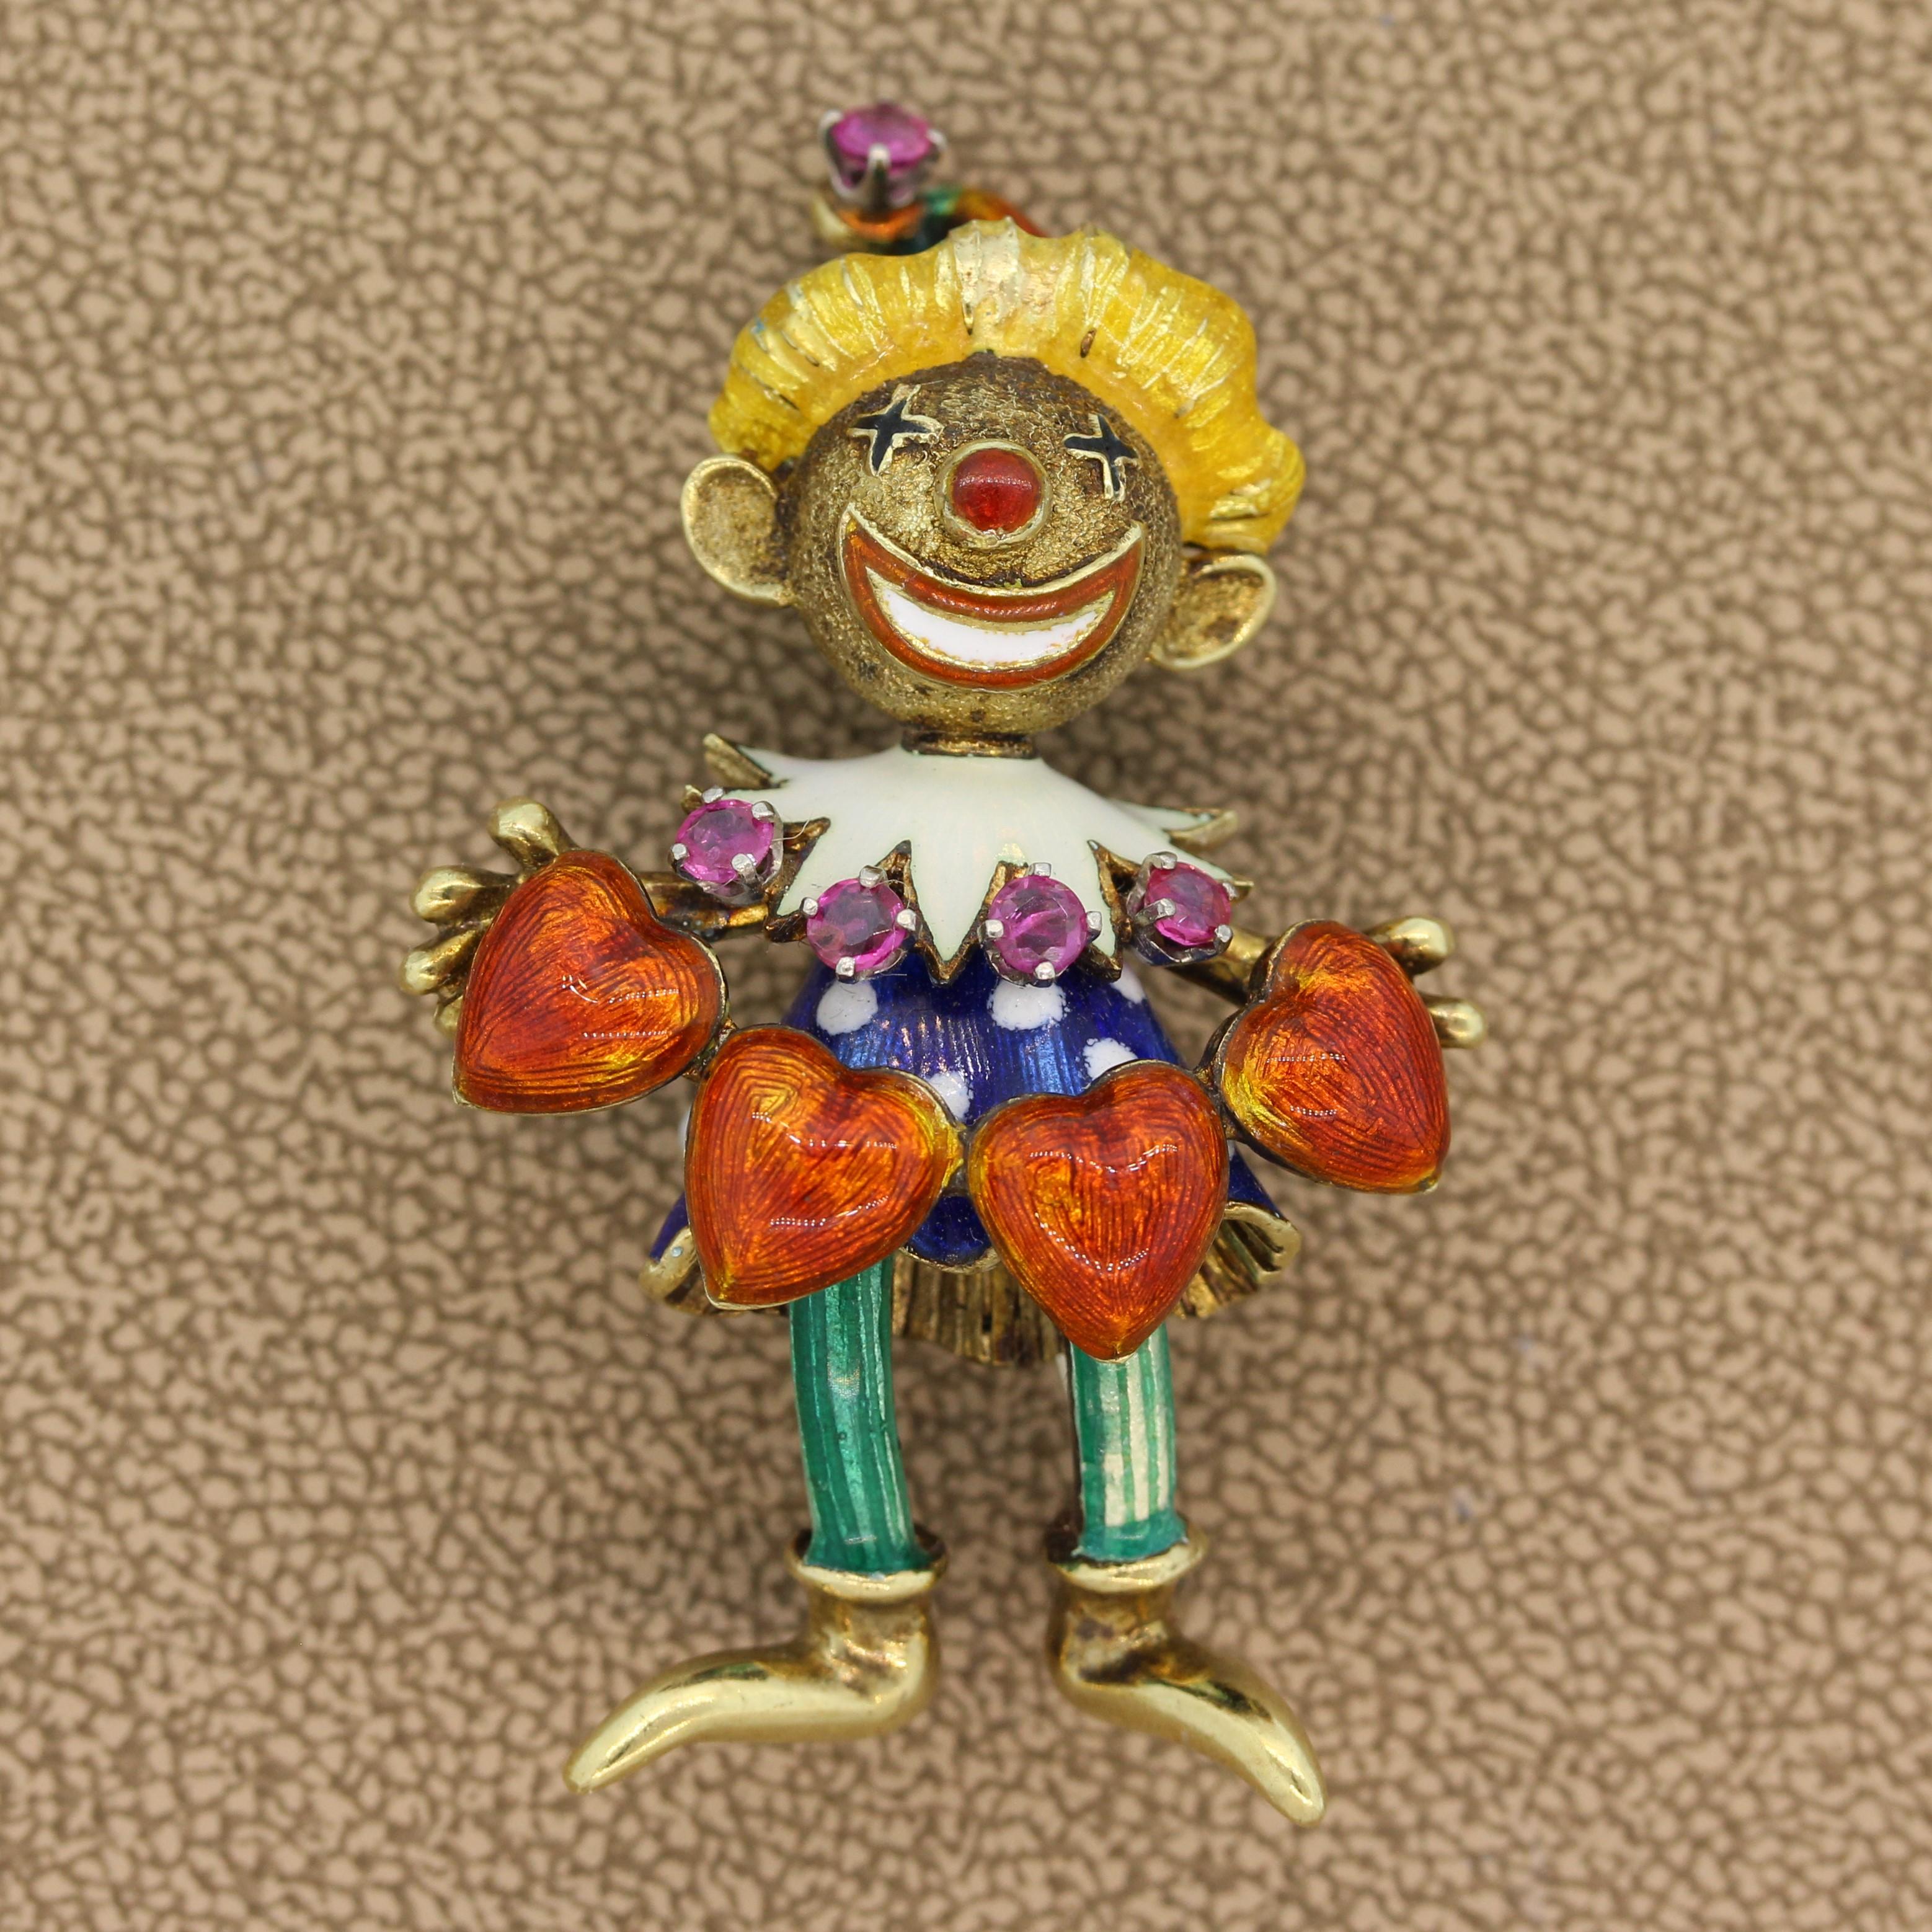 This adorable castle jester with a moving head has been hand painted with enamel. It features 0.55 carats of round cut rubies which decorate its gown. The brooch is comprised of 14K yellow gold. A whimsical piece of jewelry ready to bring life to